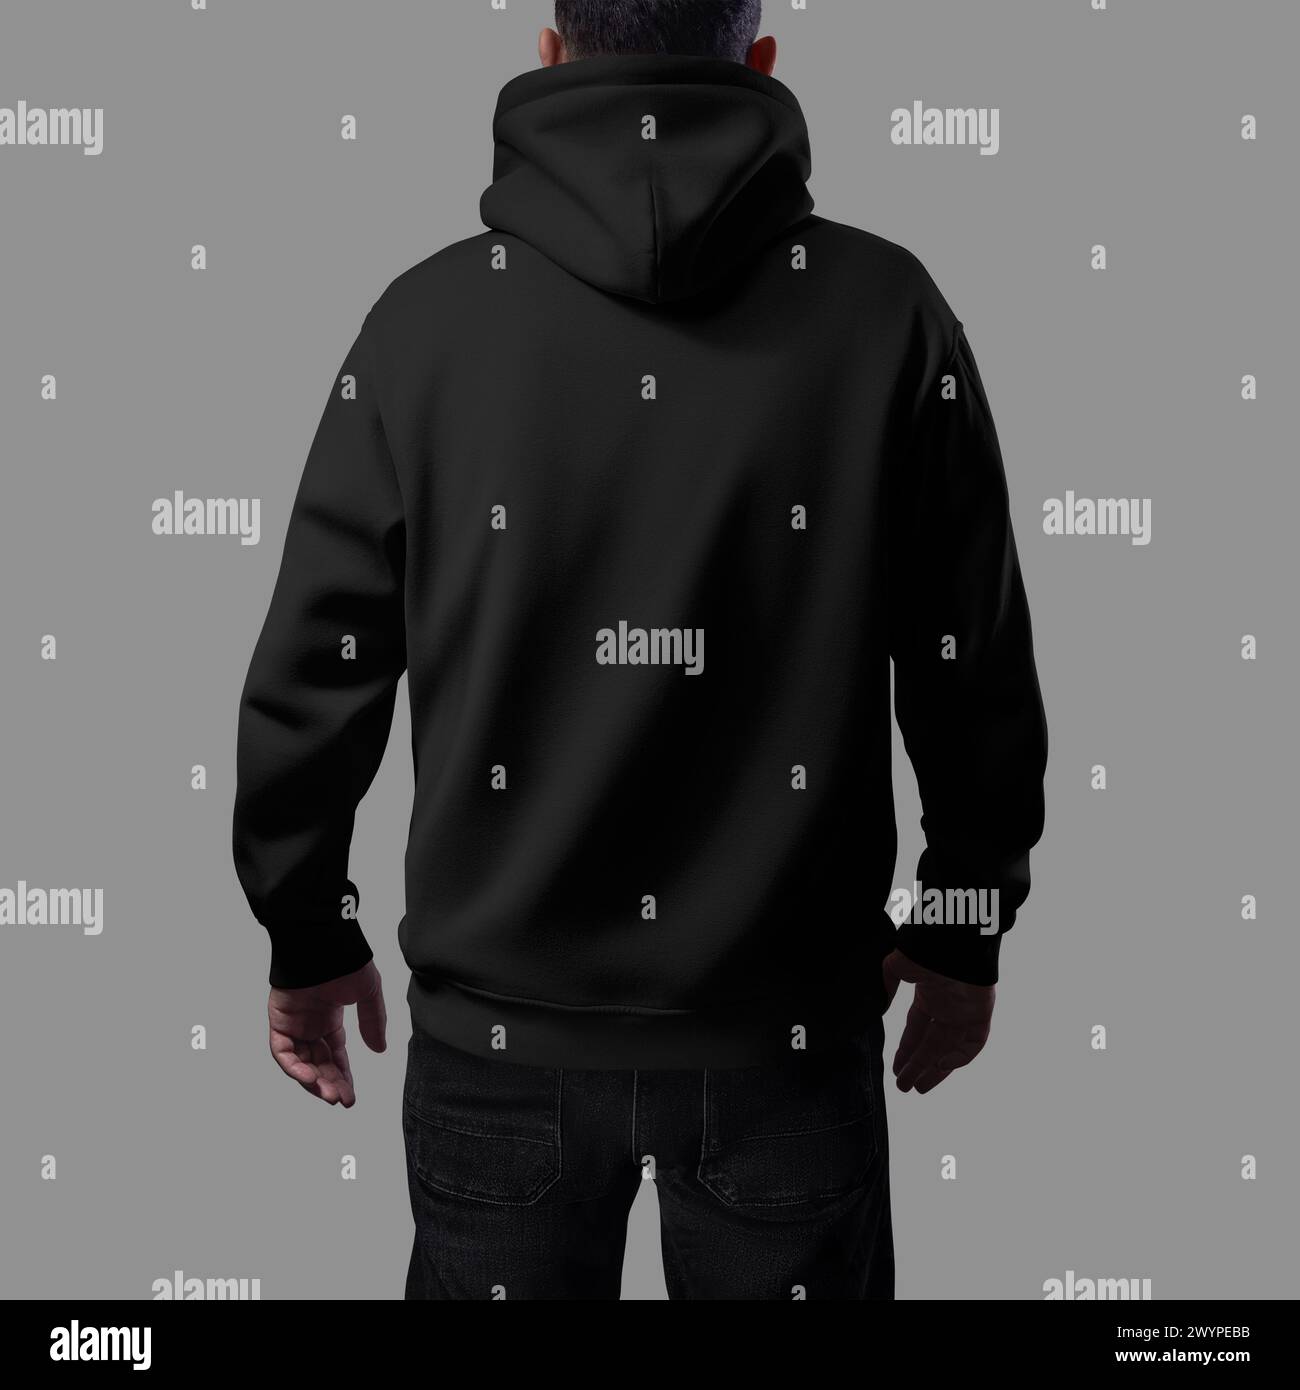 Mockup of a black oversized hoodie on a man in dark jeans, close-up rear view, loose clothes for design, branding, advertising. Texture streetwear tem Stock Photo